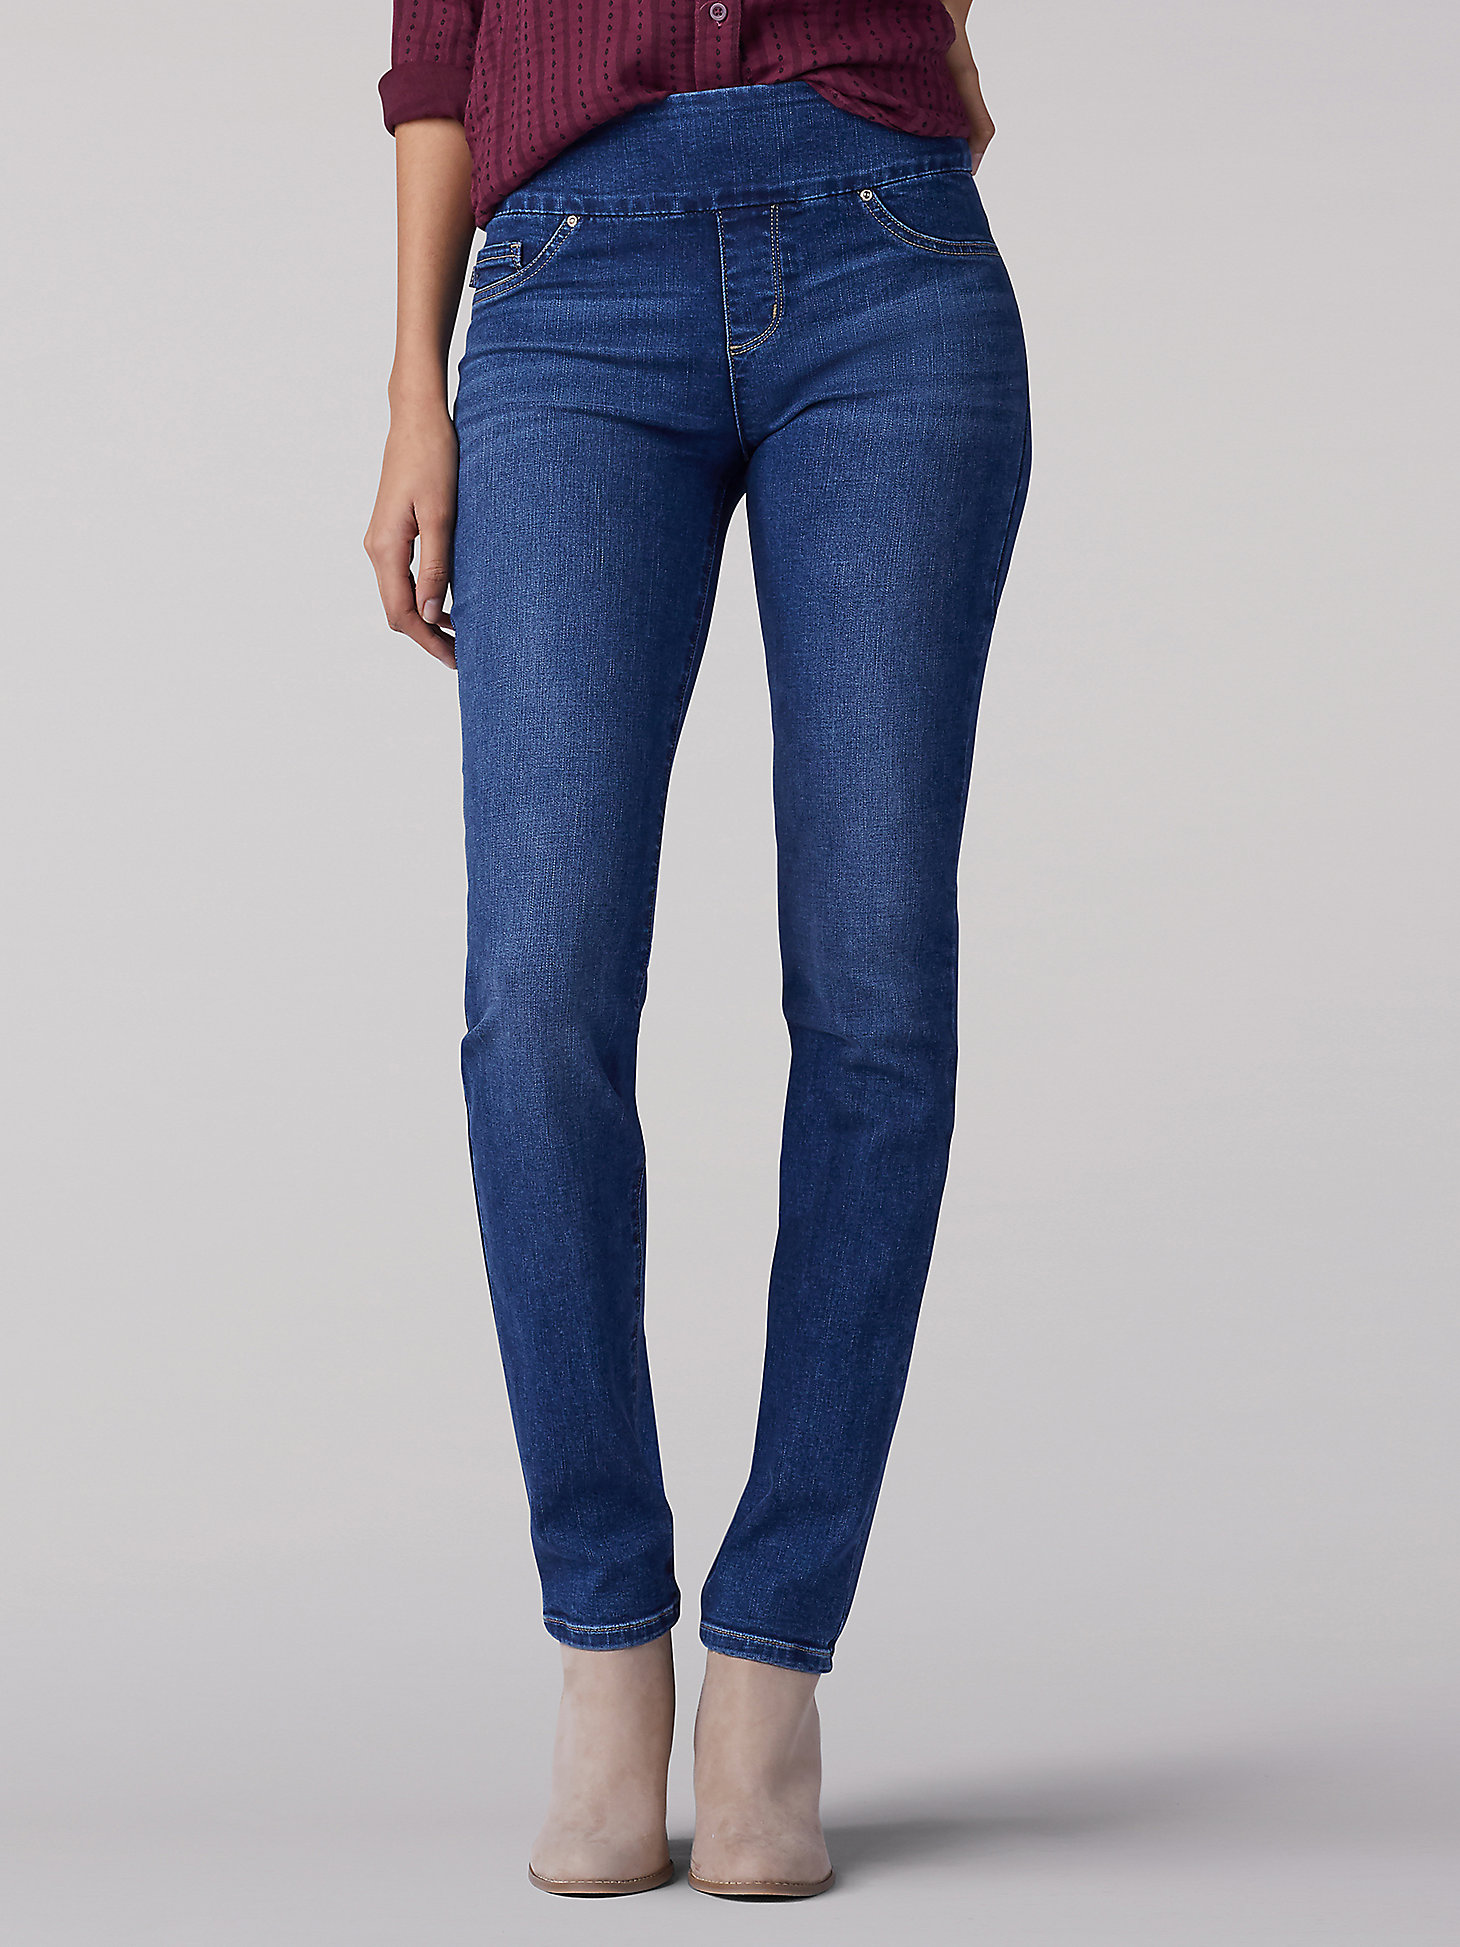 Women’s Sculpting Slim Fit Slim Leg Pull On Jean in Expedition alternative view 3